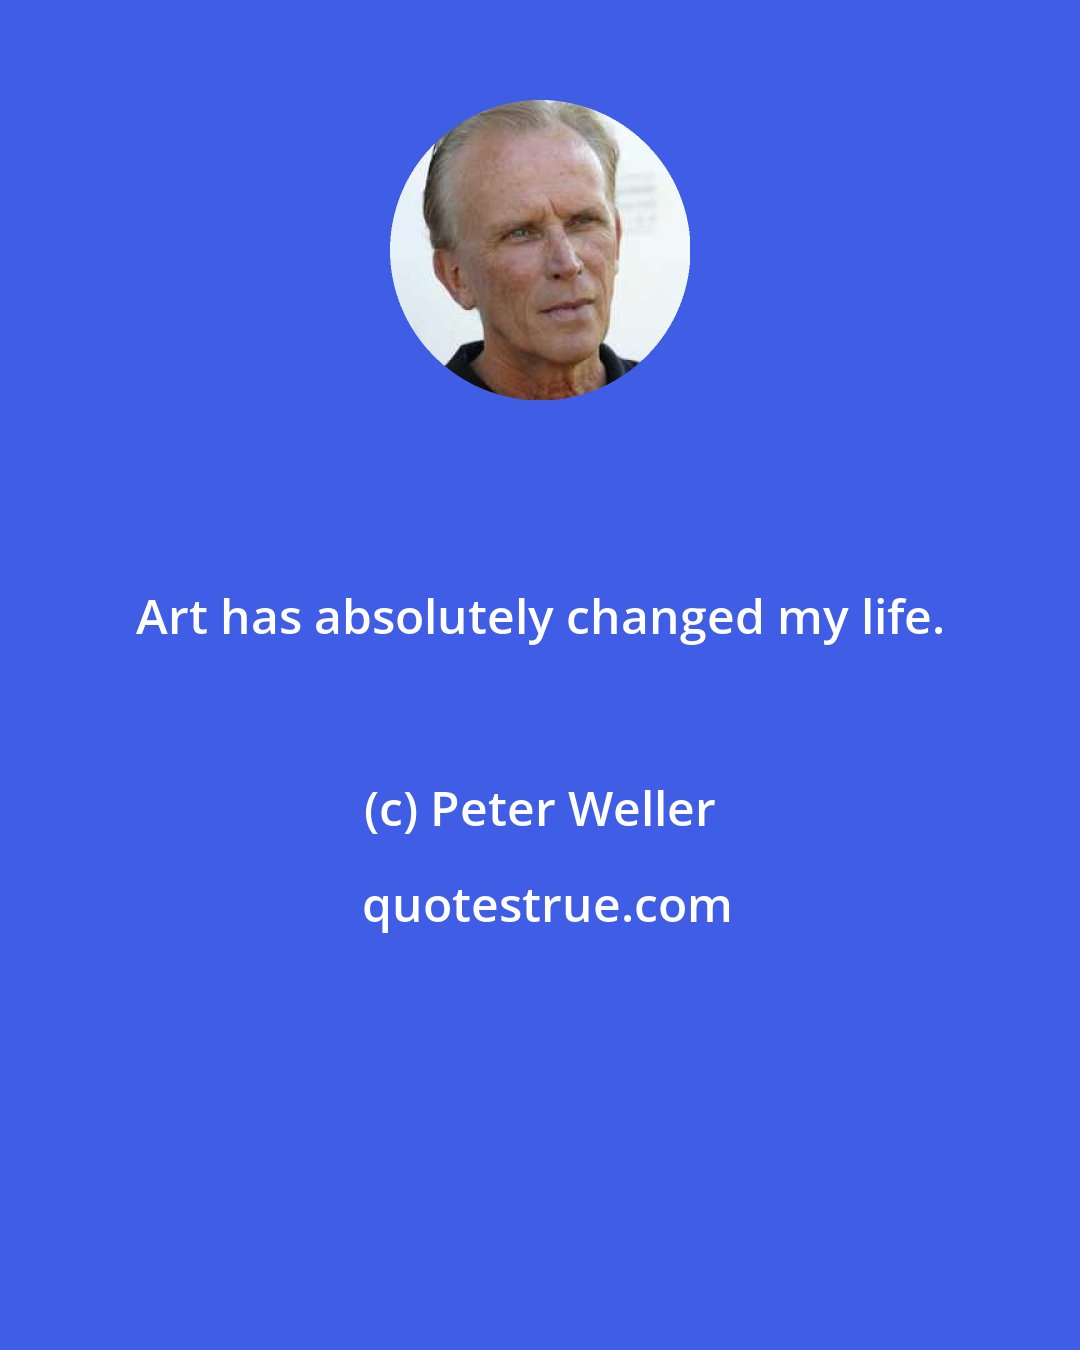 Peter Weller: Art has absolutely changed my life.